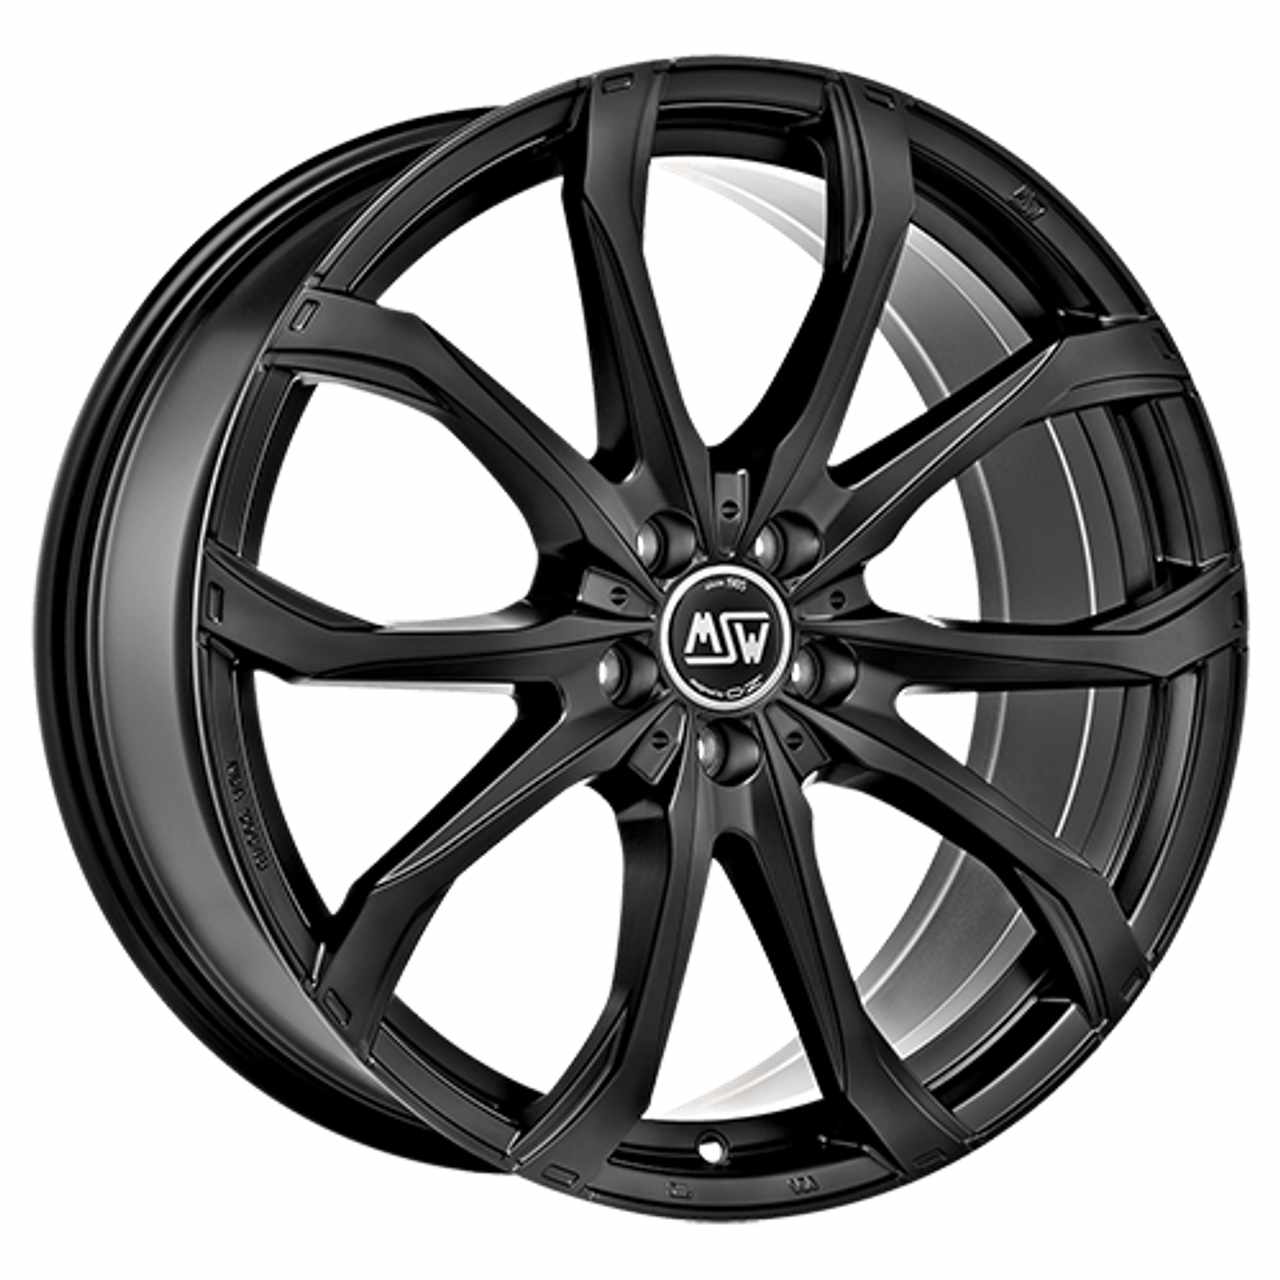 MSW (OZ) MSW 48 gloss black full polished 9.5Jx20 5x130 ET52